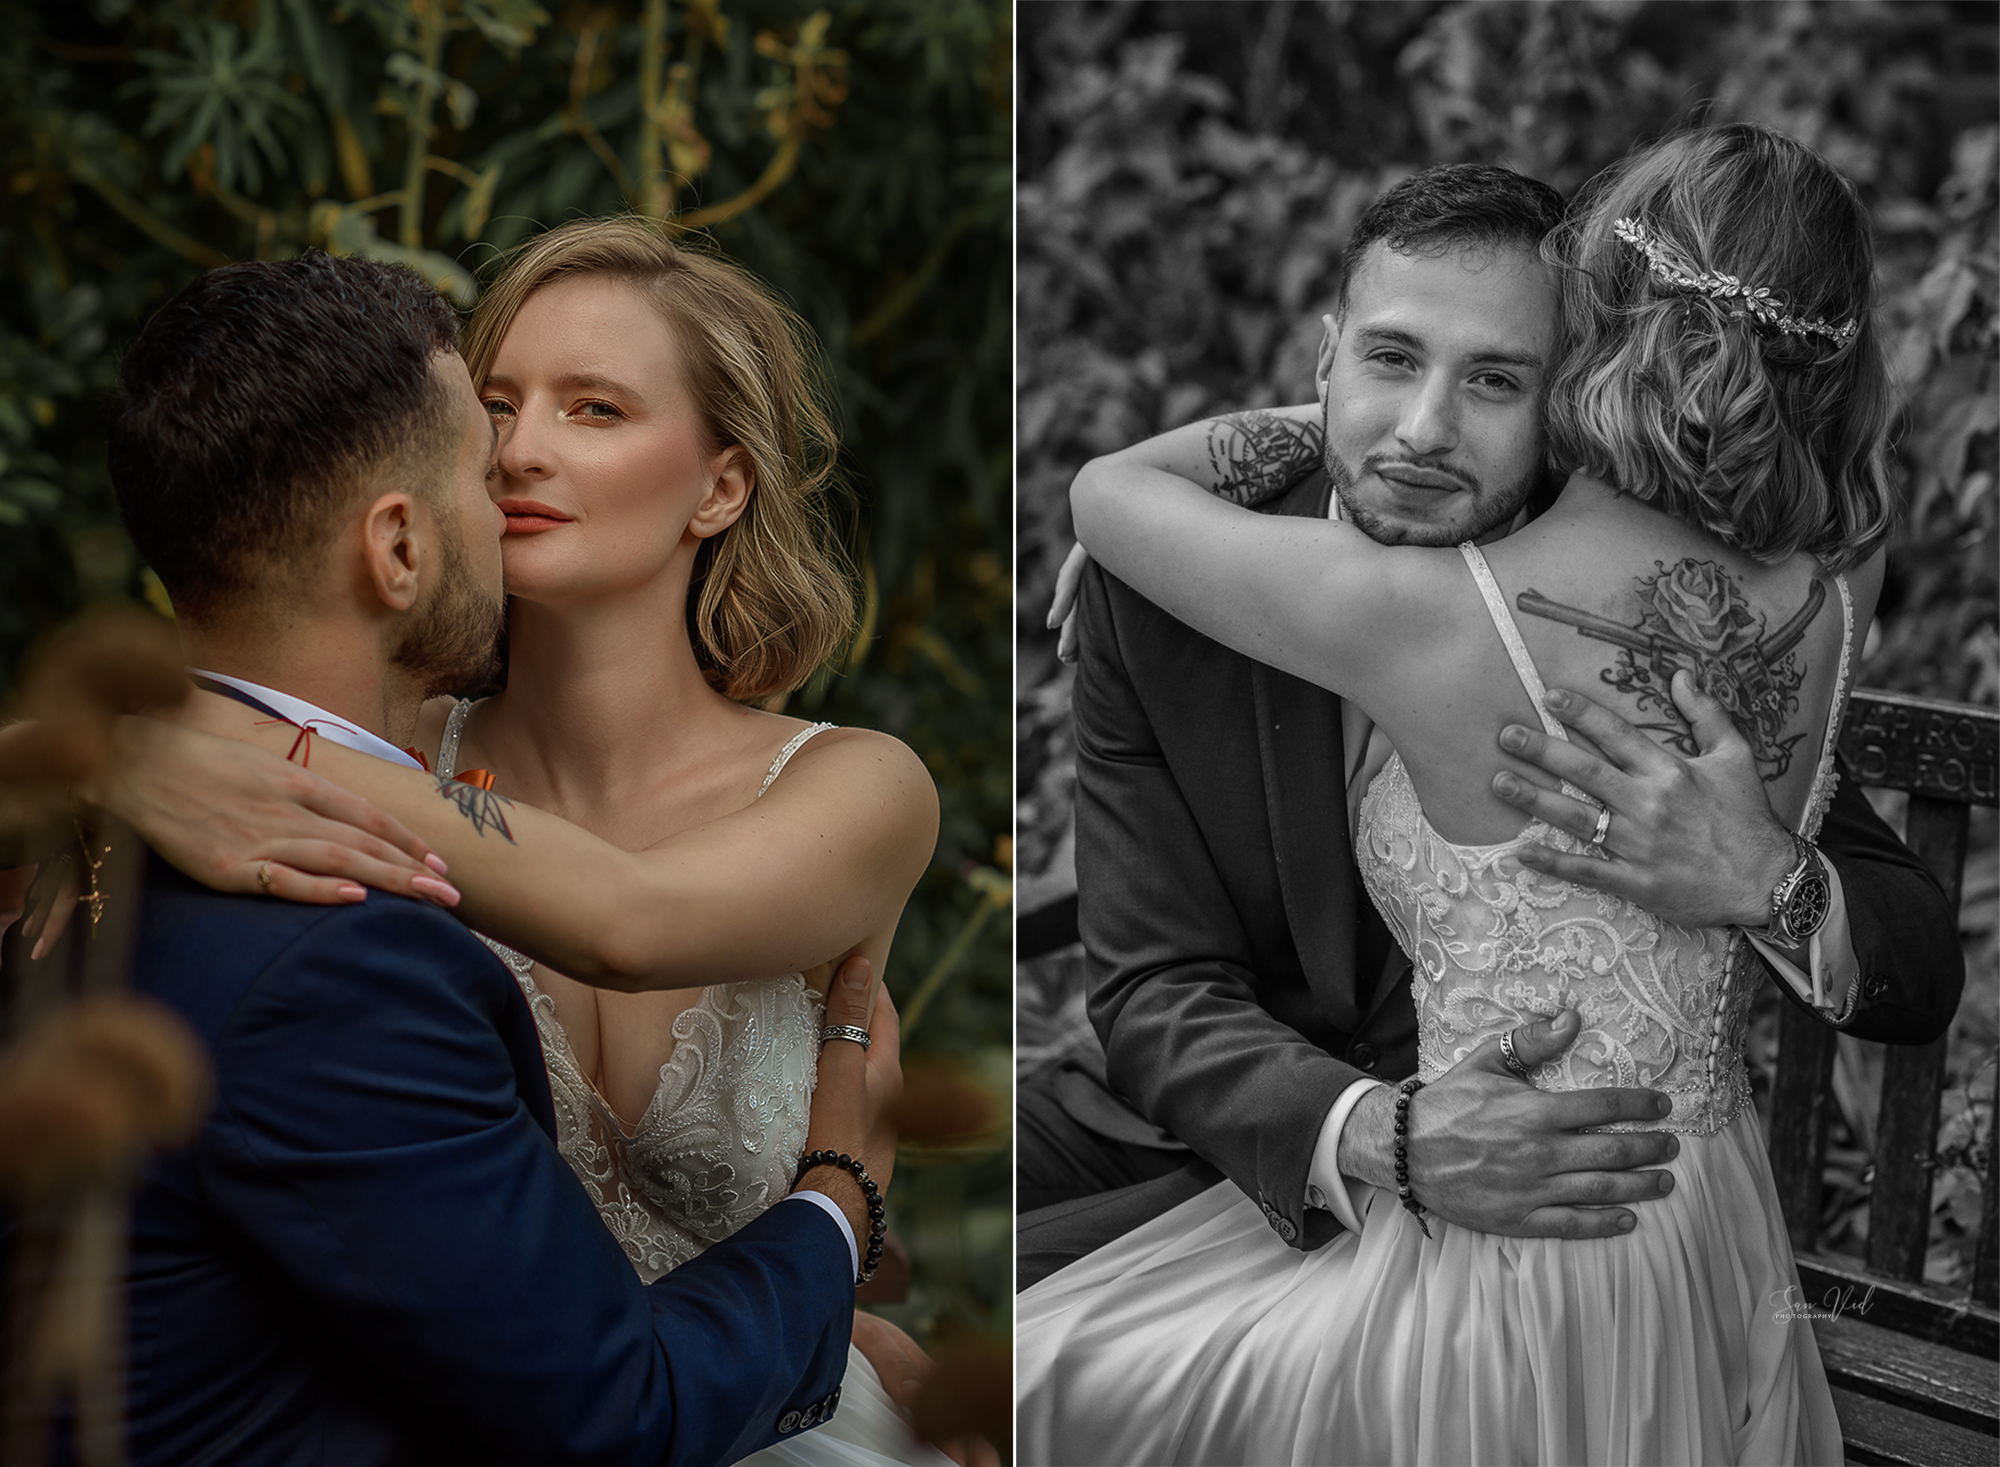 Creative Wedding Photography Bride And Groom The Rookery Park London